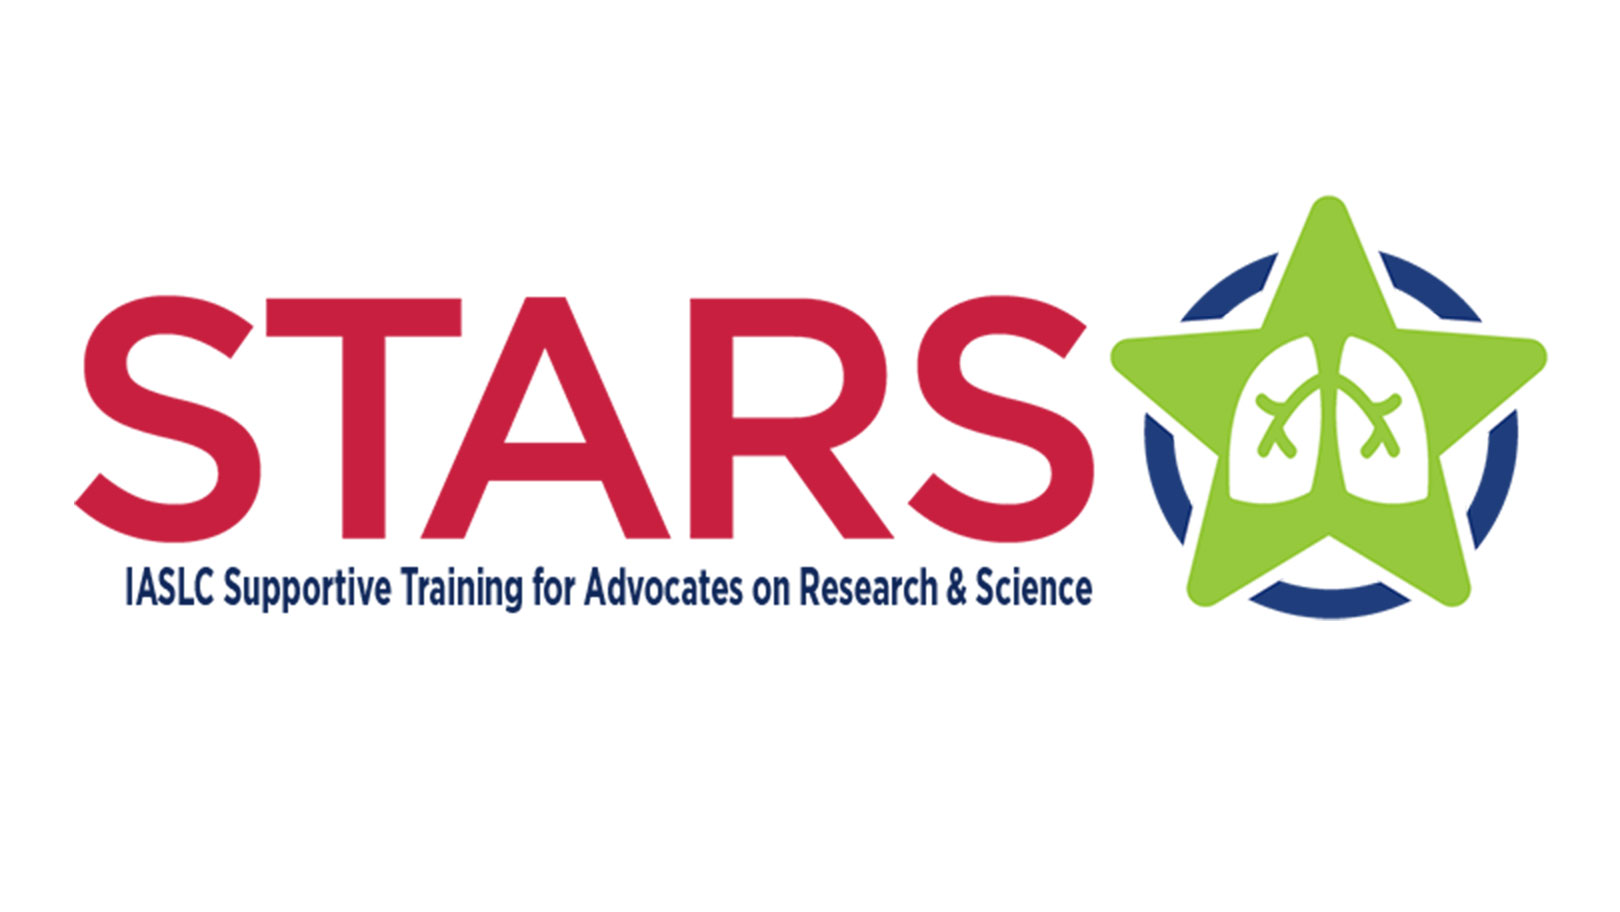 Program Trains Patient Research Advocates to be STARS